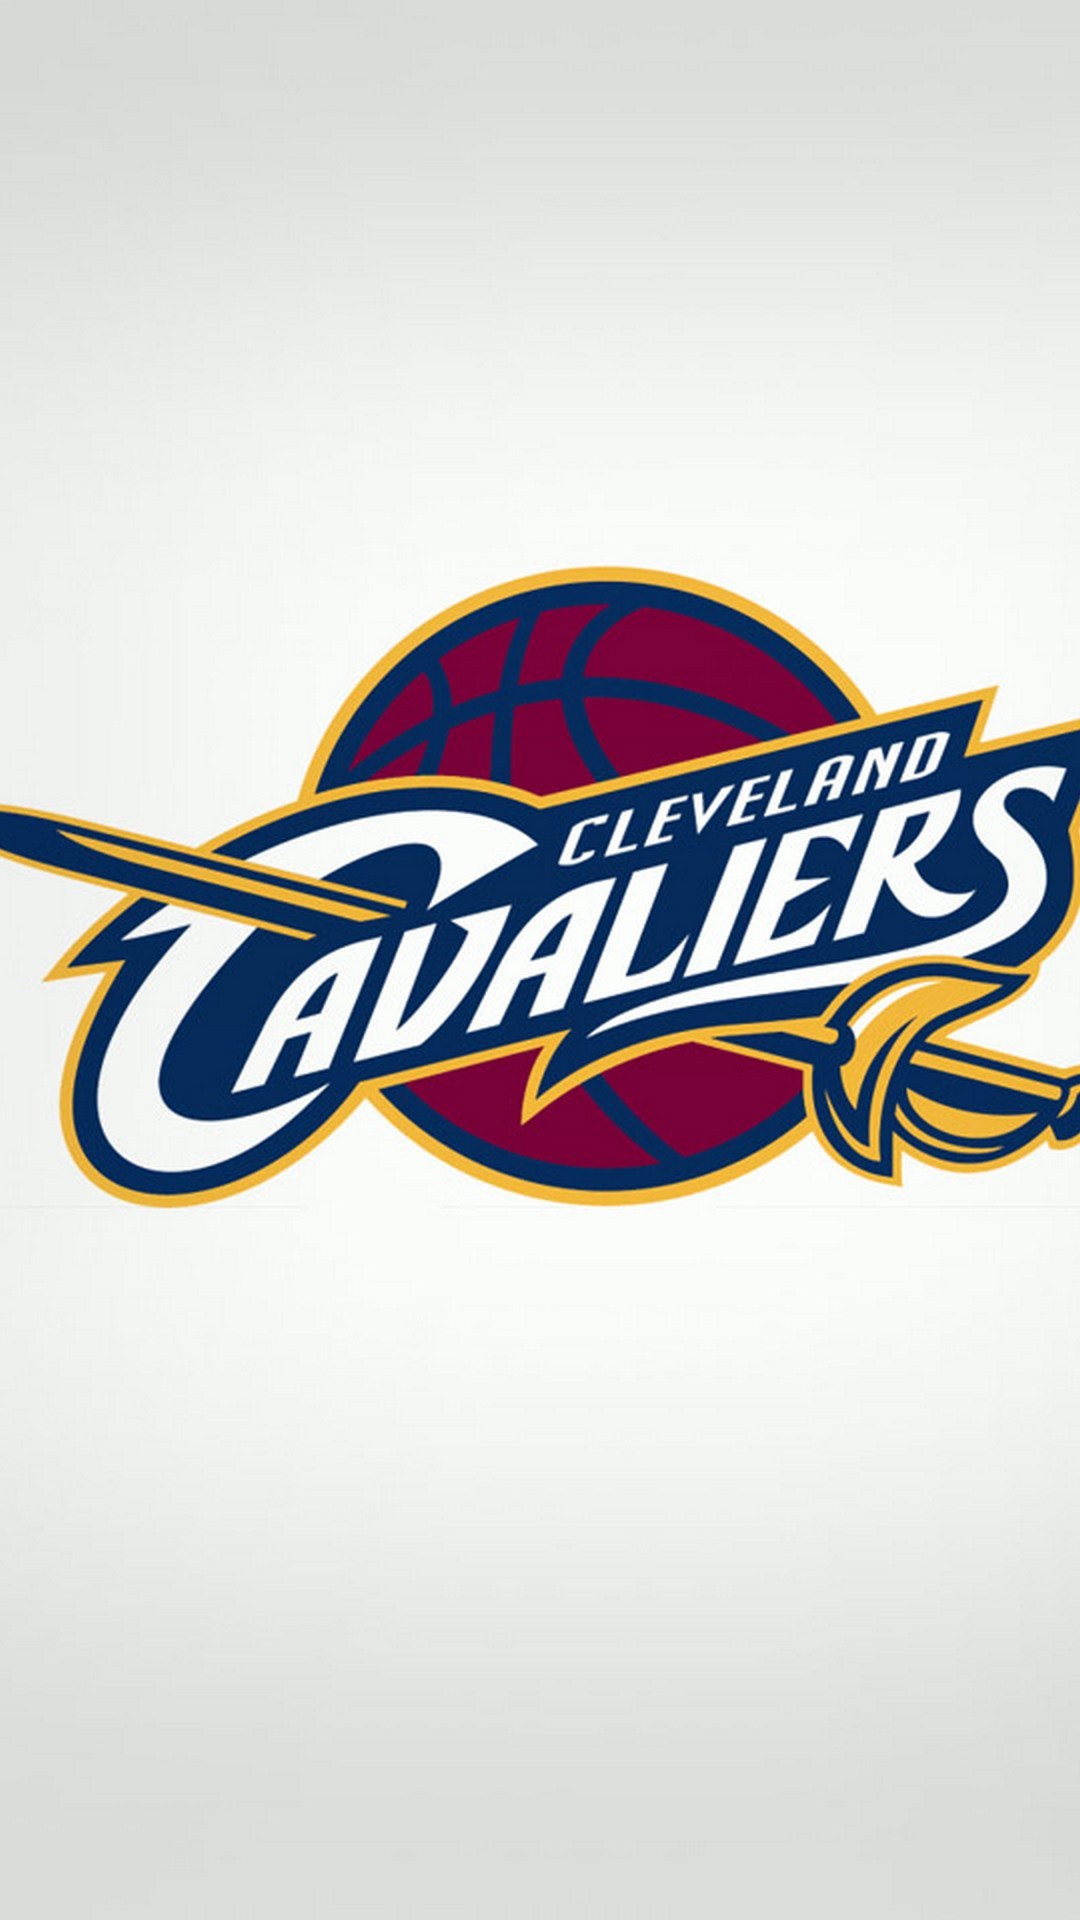 1080x1920 Wallpaper Cleveland Cavaliers iphone resolution 